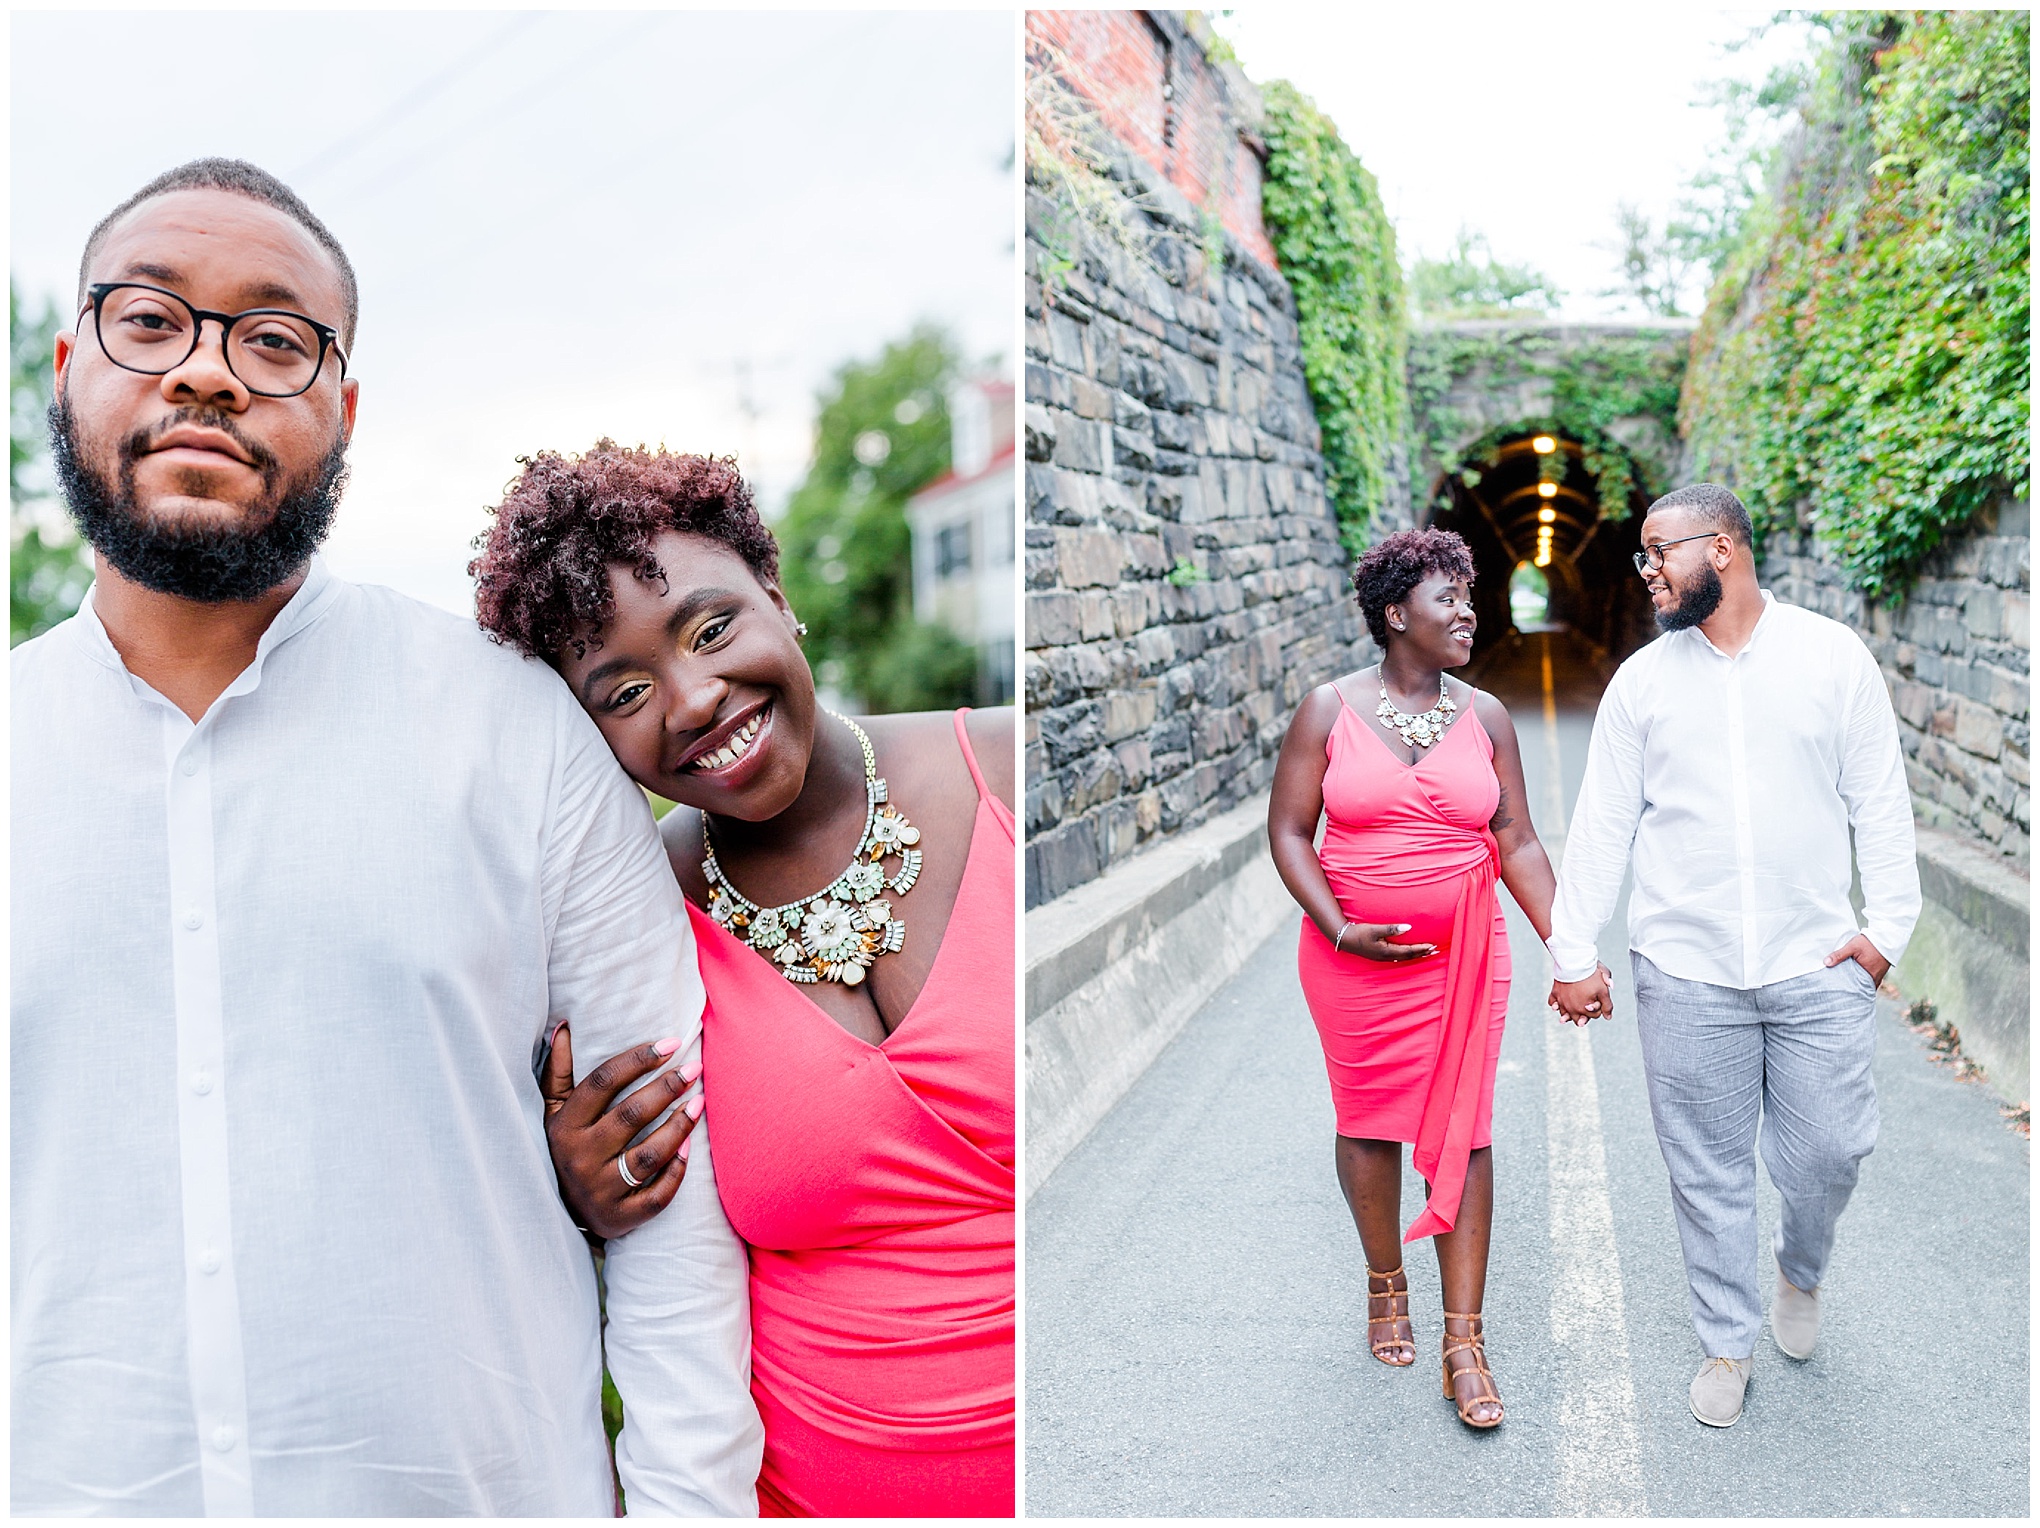 Wilkes Street Tunnel maternity photos, maternity style, coral dress, married couple, mom to be, dad to be, old town Alexandria, northern Virginia, maternity photographer, Alexandria maternity photographer, magic hour portraits